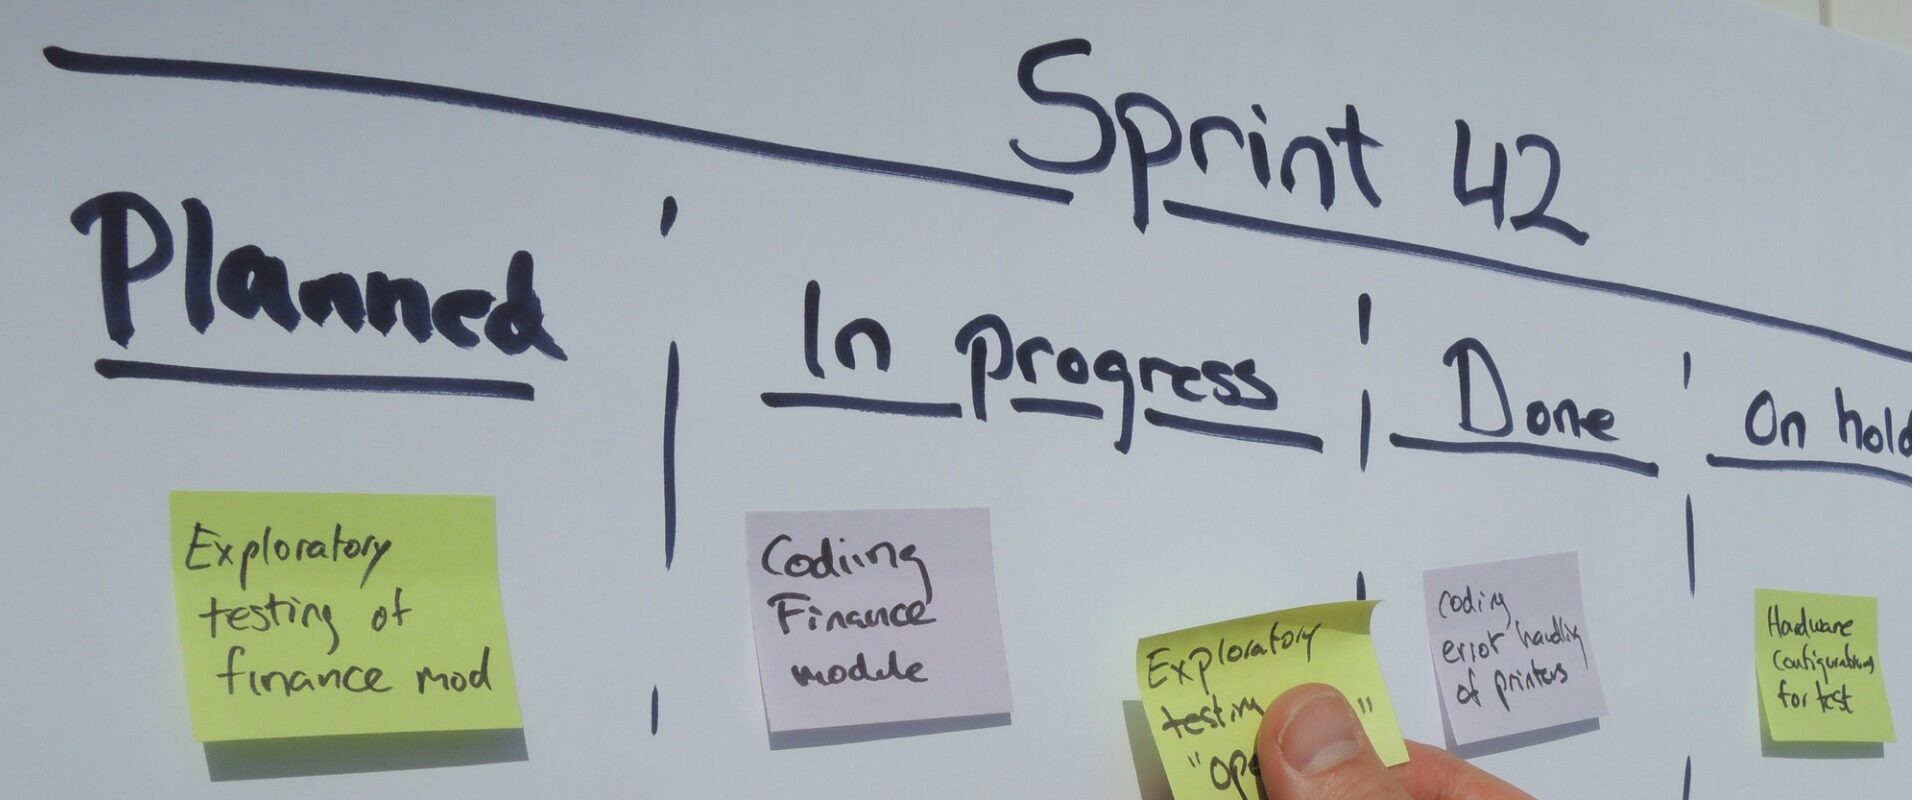 Whiteboard sprint exercise with post-it notes